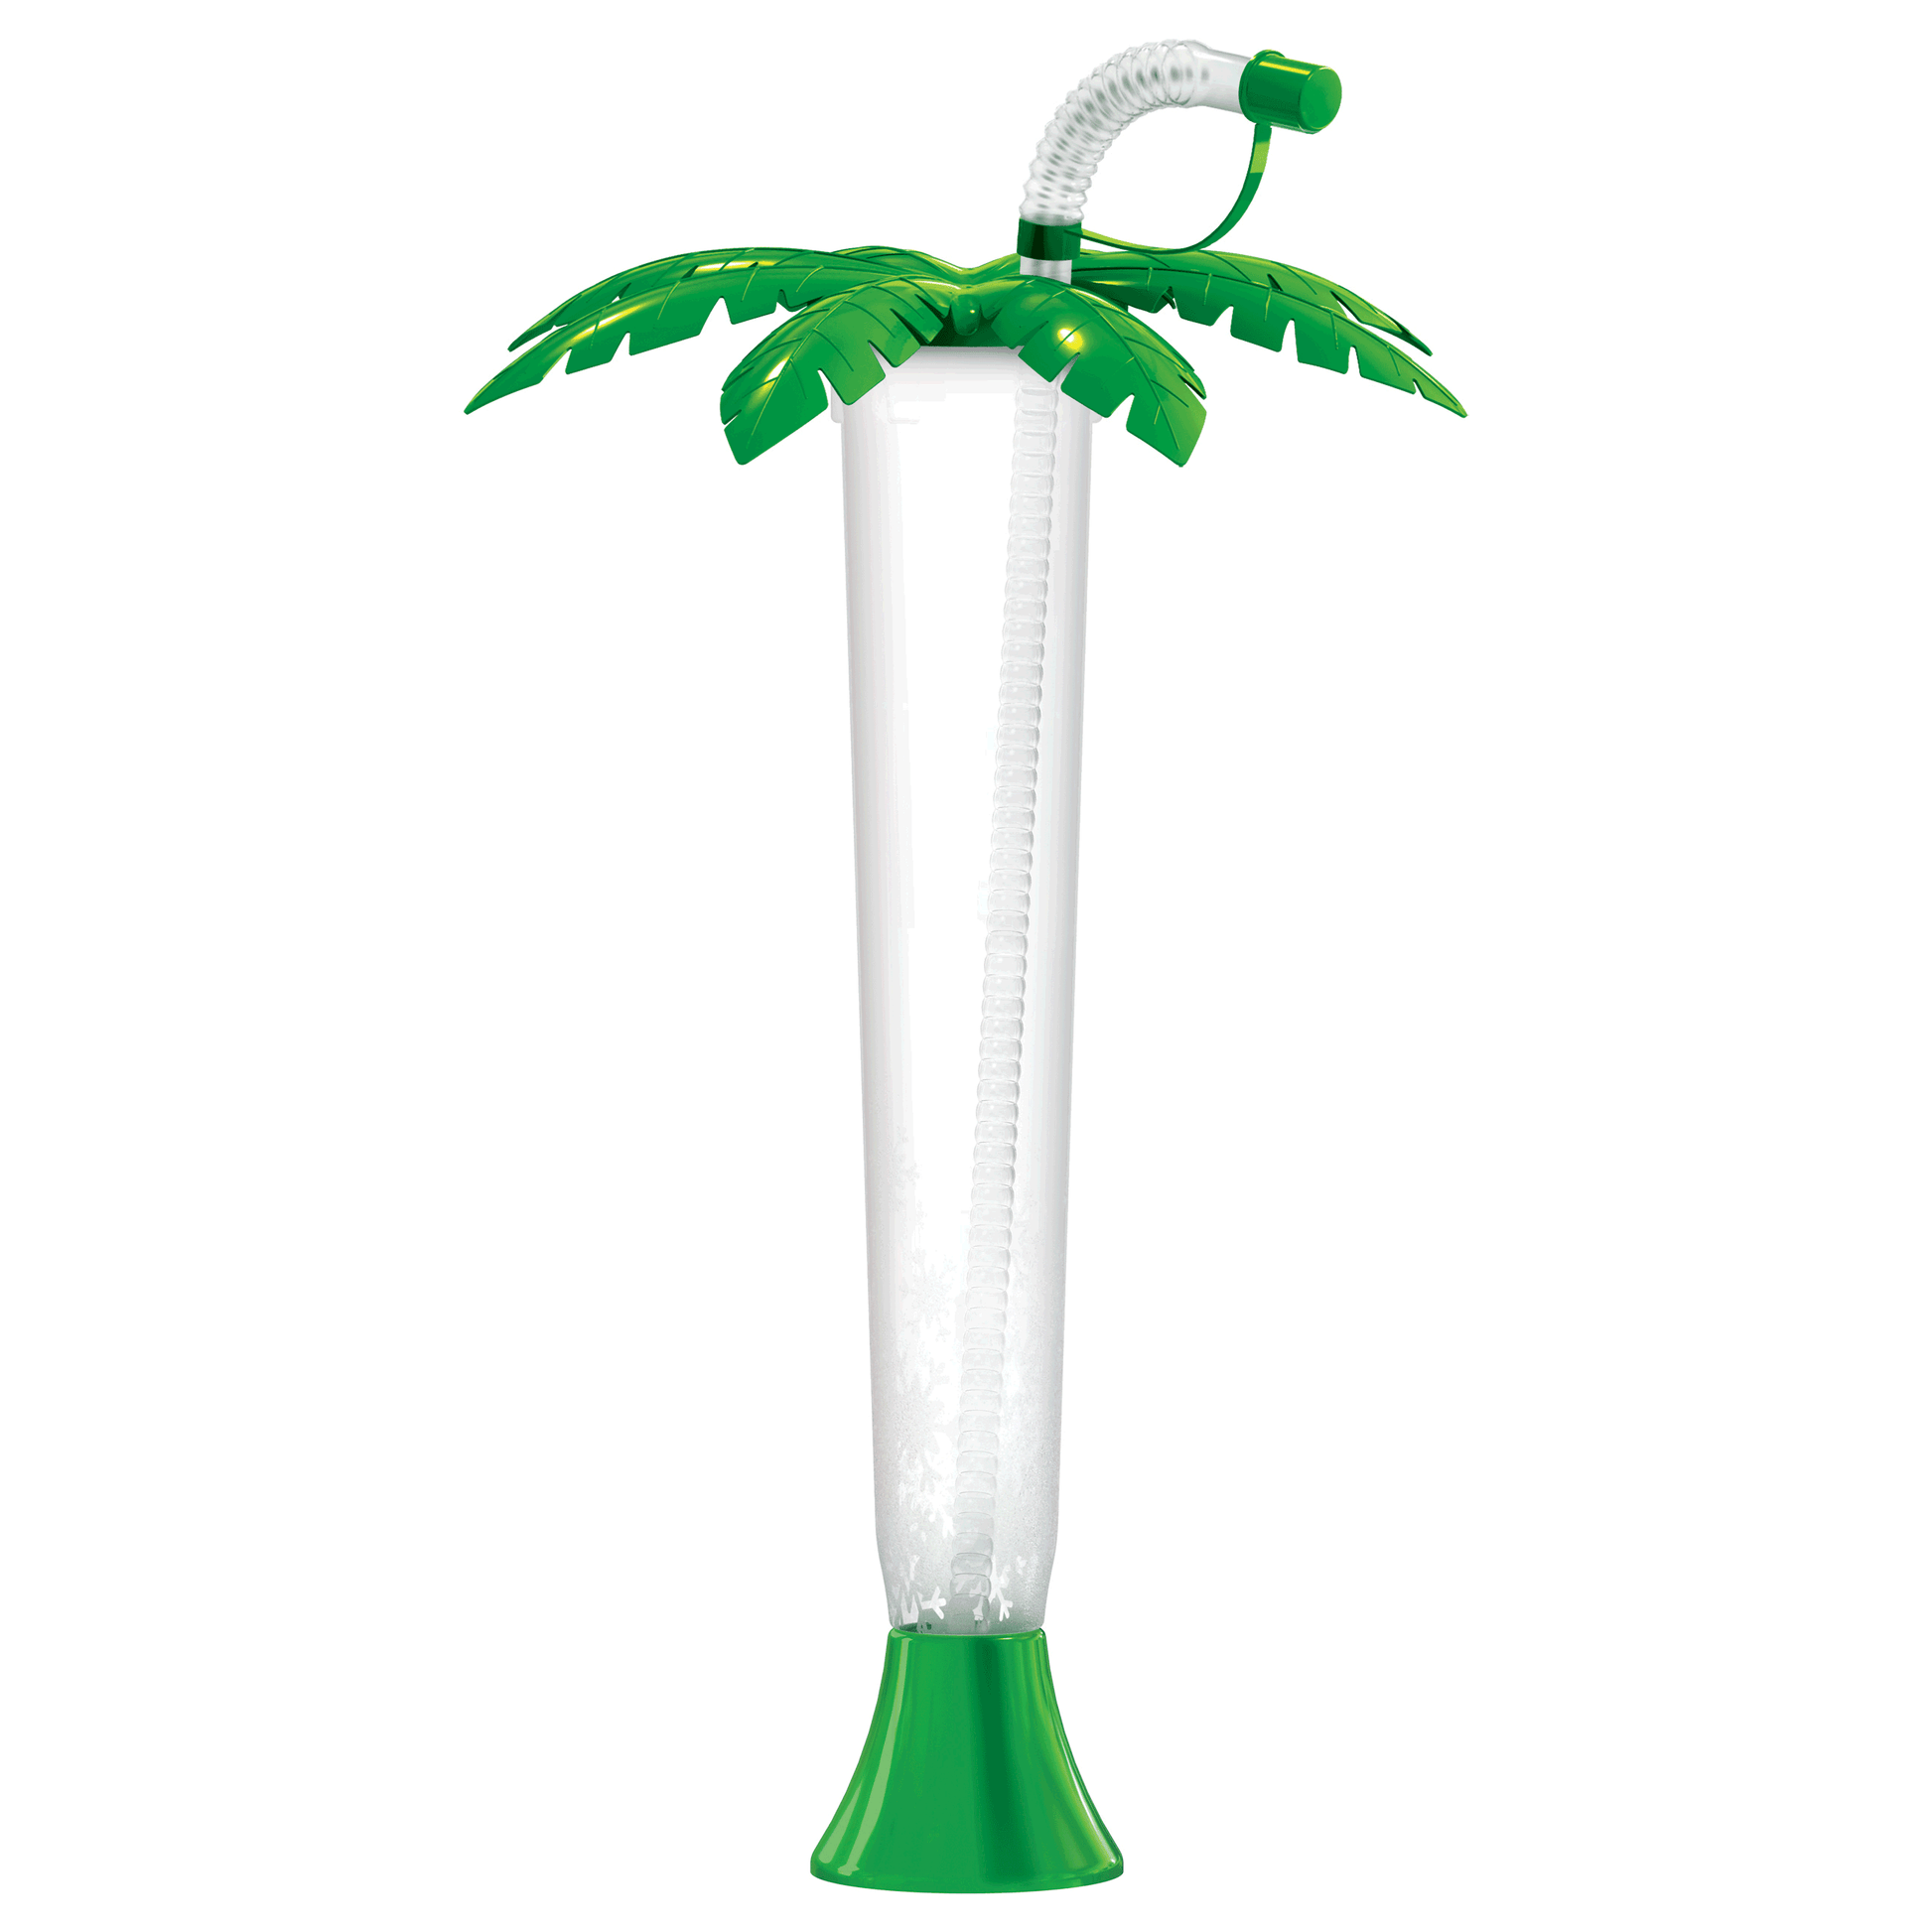 Beach Theme Plastic Cups With Lids and Straws: Luau Plastic Drink Cups With  Lids and Straws 